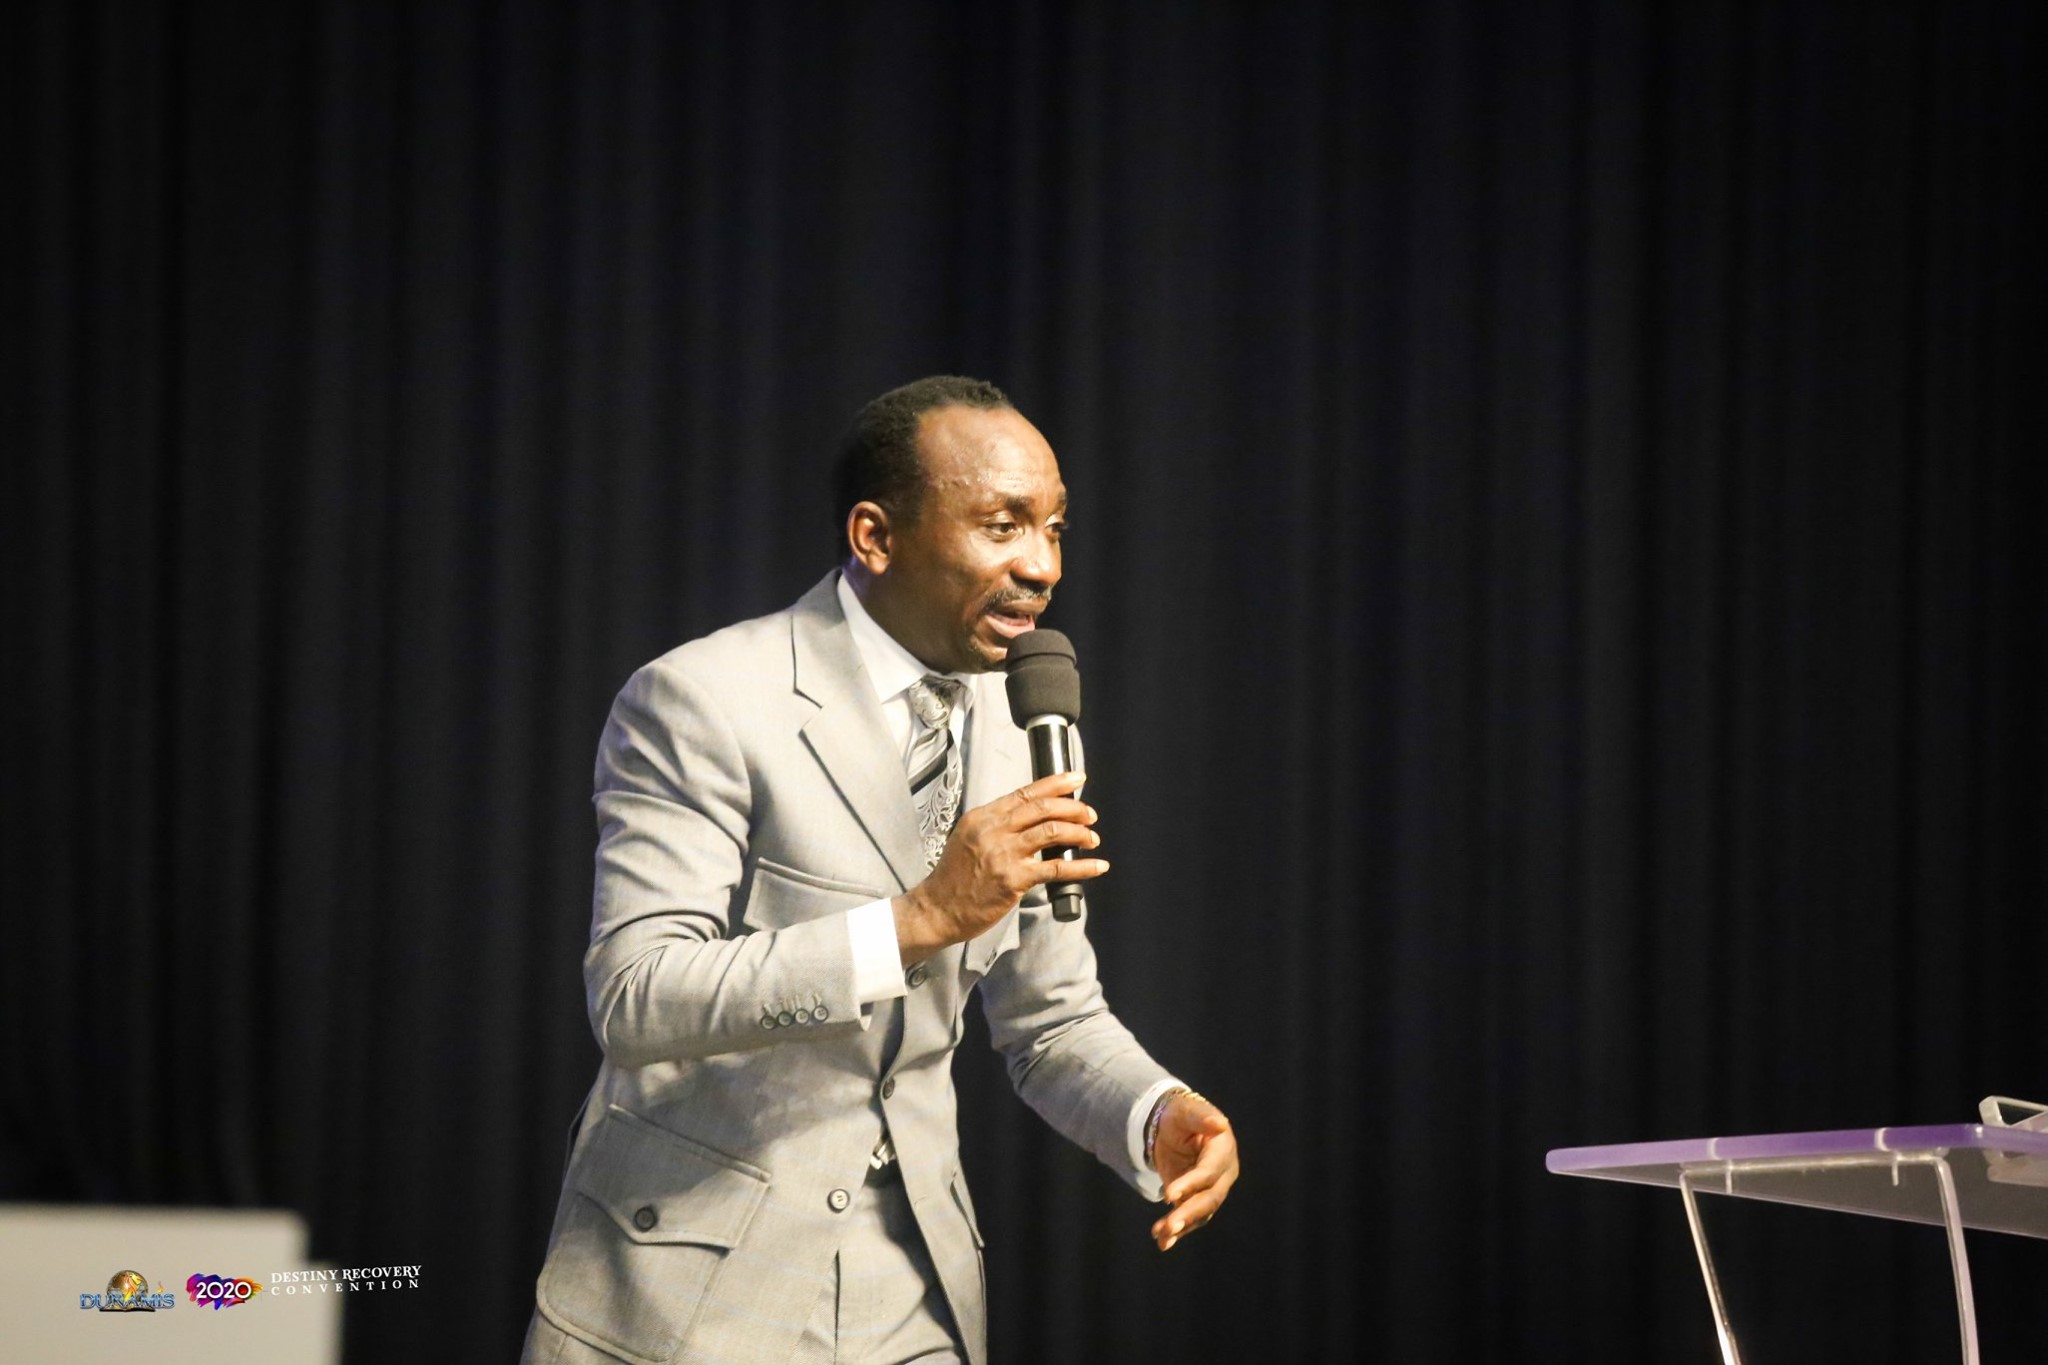 You are Always There to Help mp3 by - Dr Paul Enenche